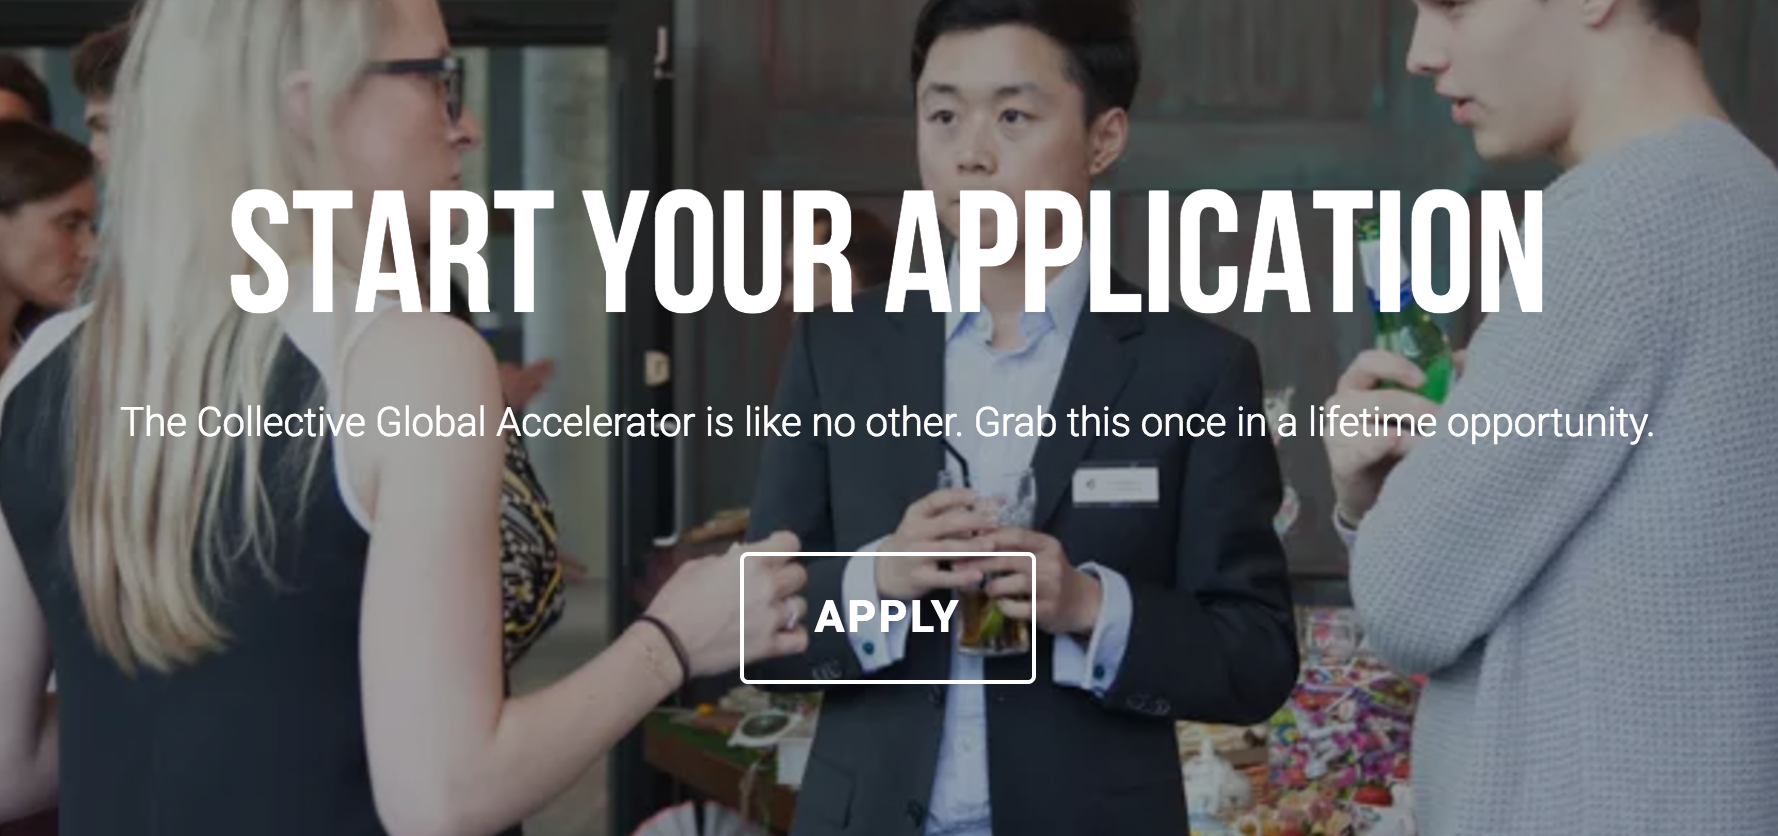 Collective global accelerator